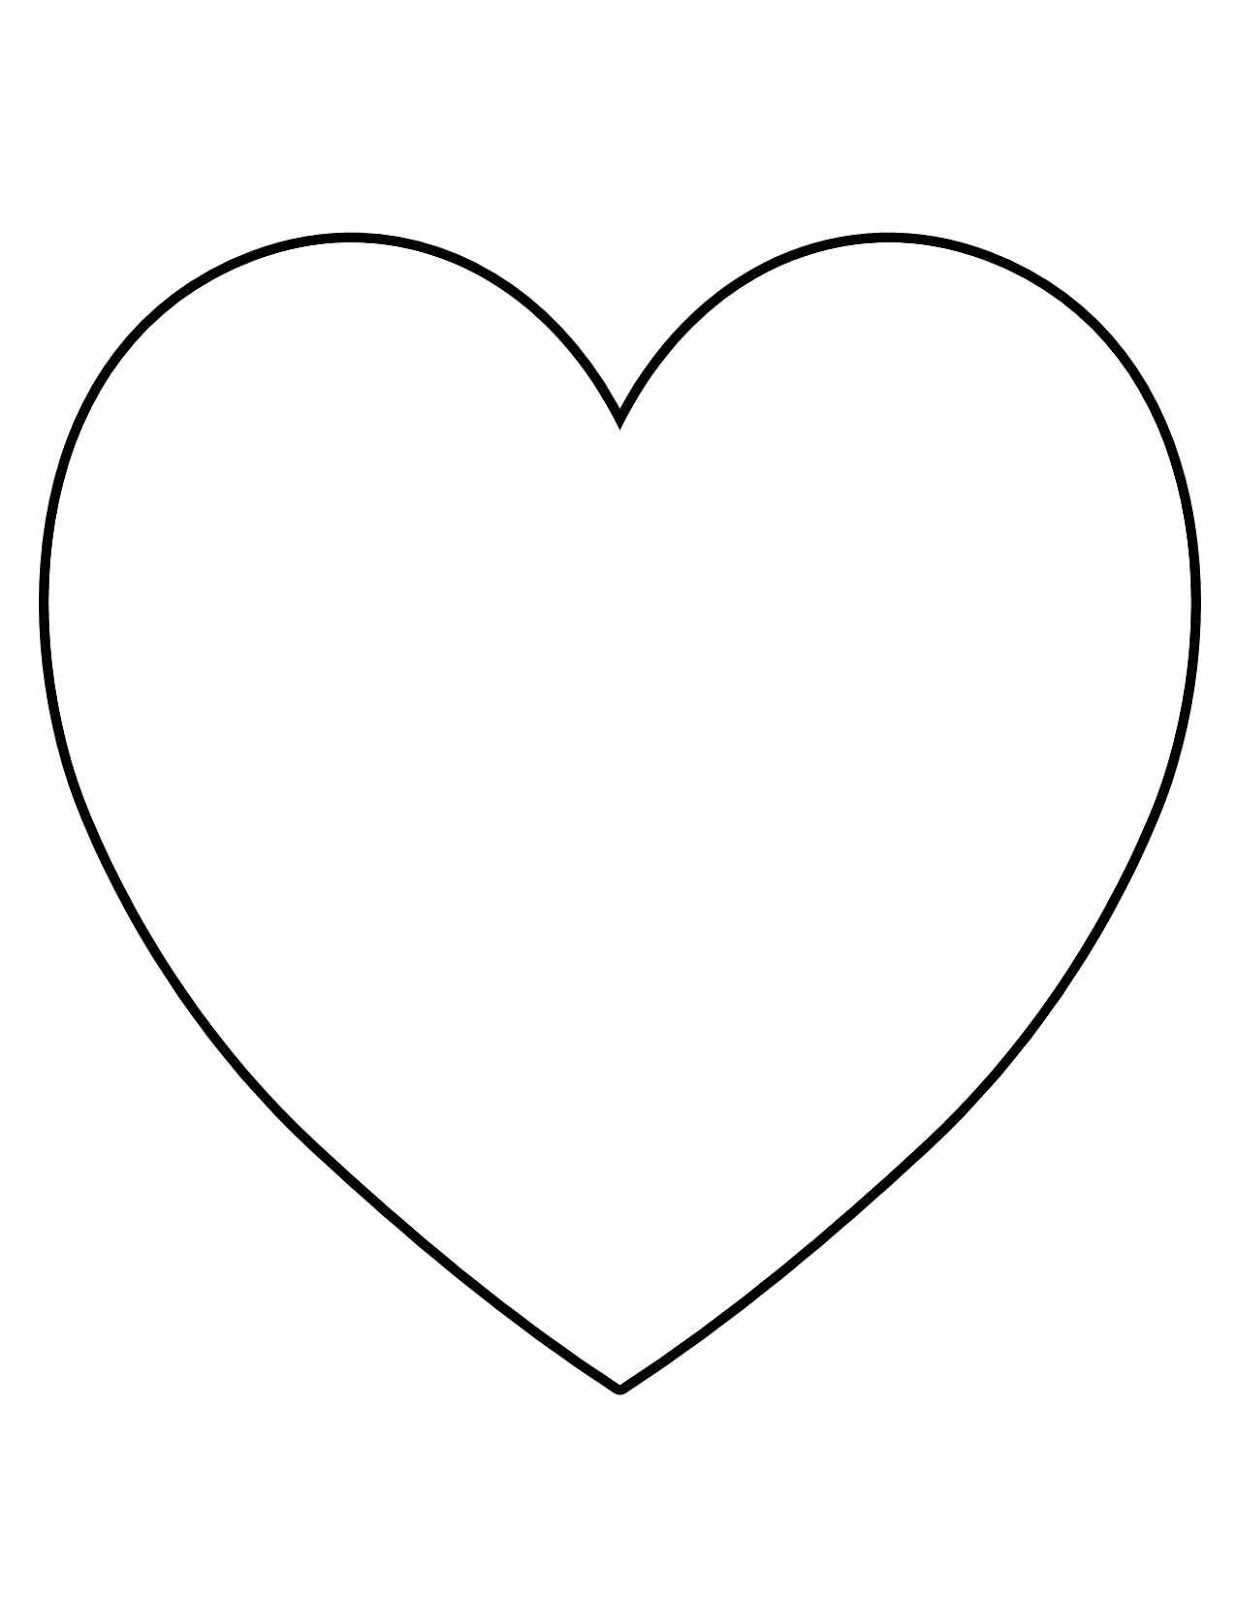 Outline Of Heart Shape Free Cliparts That You Can Download To You